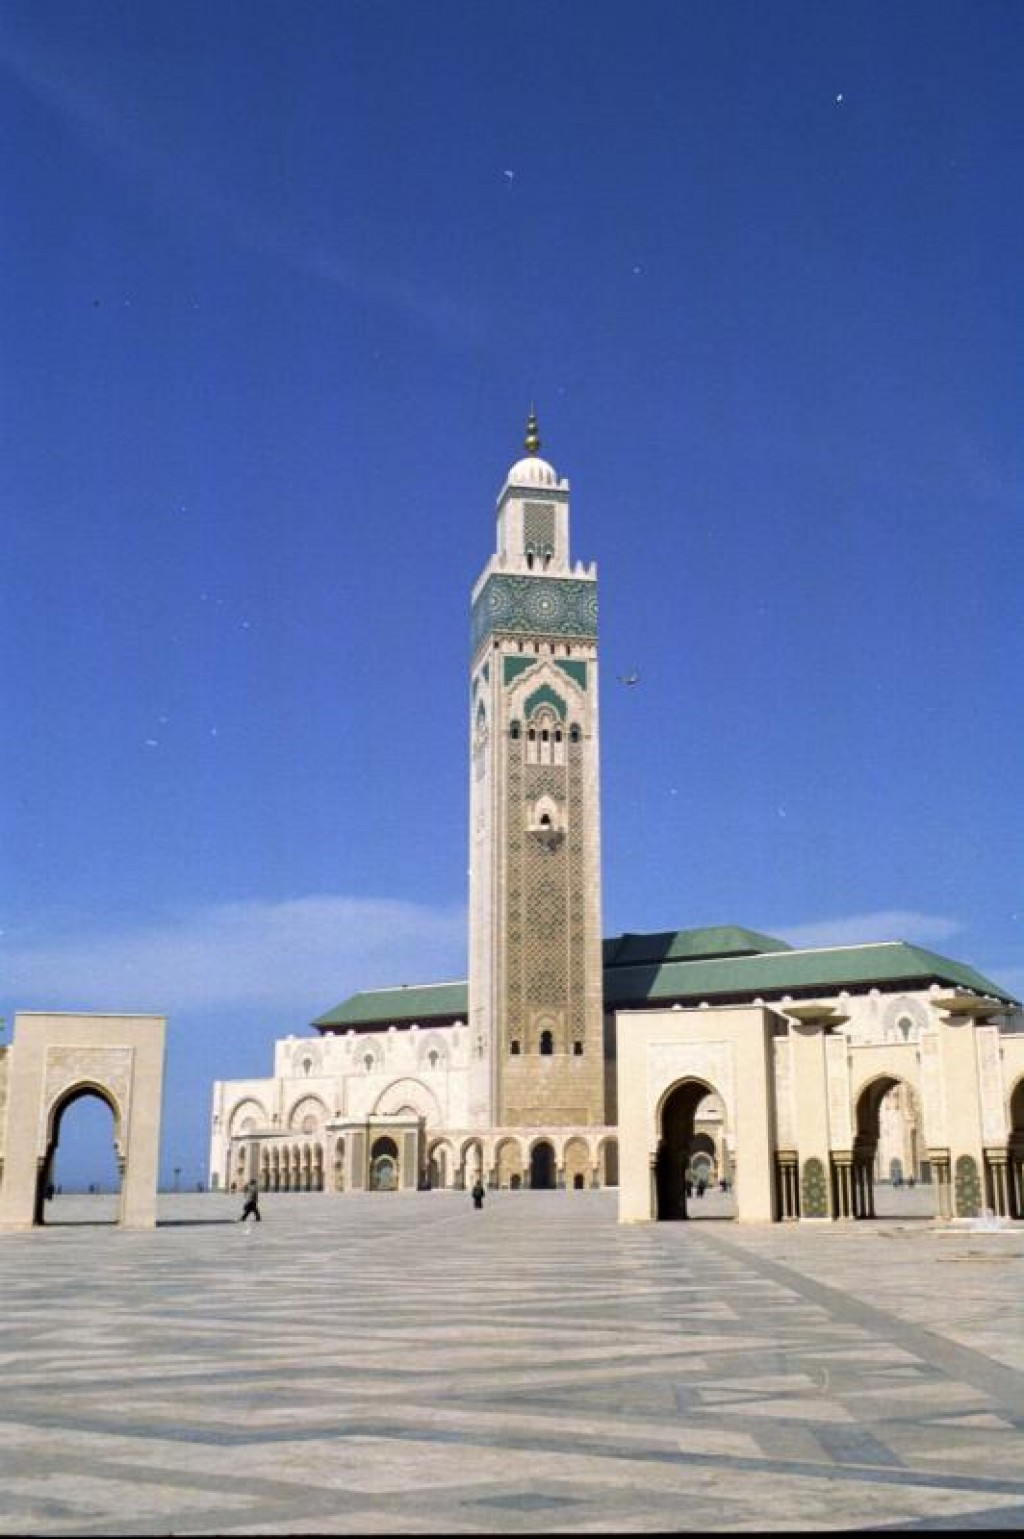 On our way out of Morocco, we stopped in Casablanca to visit the Hassan II Mosque.  It is the third-largest Mosque in existence. It was built from 1980 to 1994. 